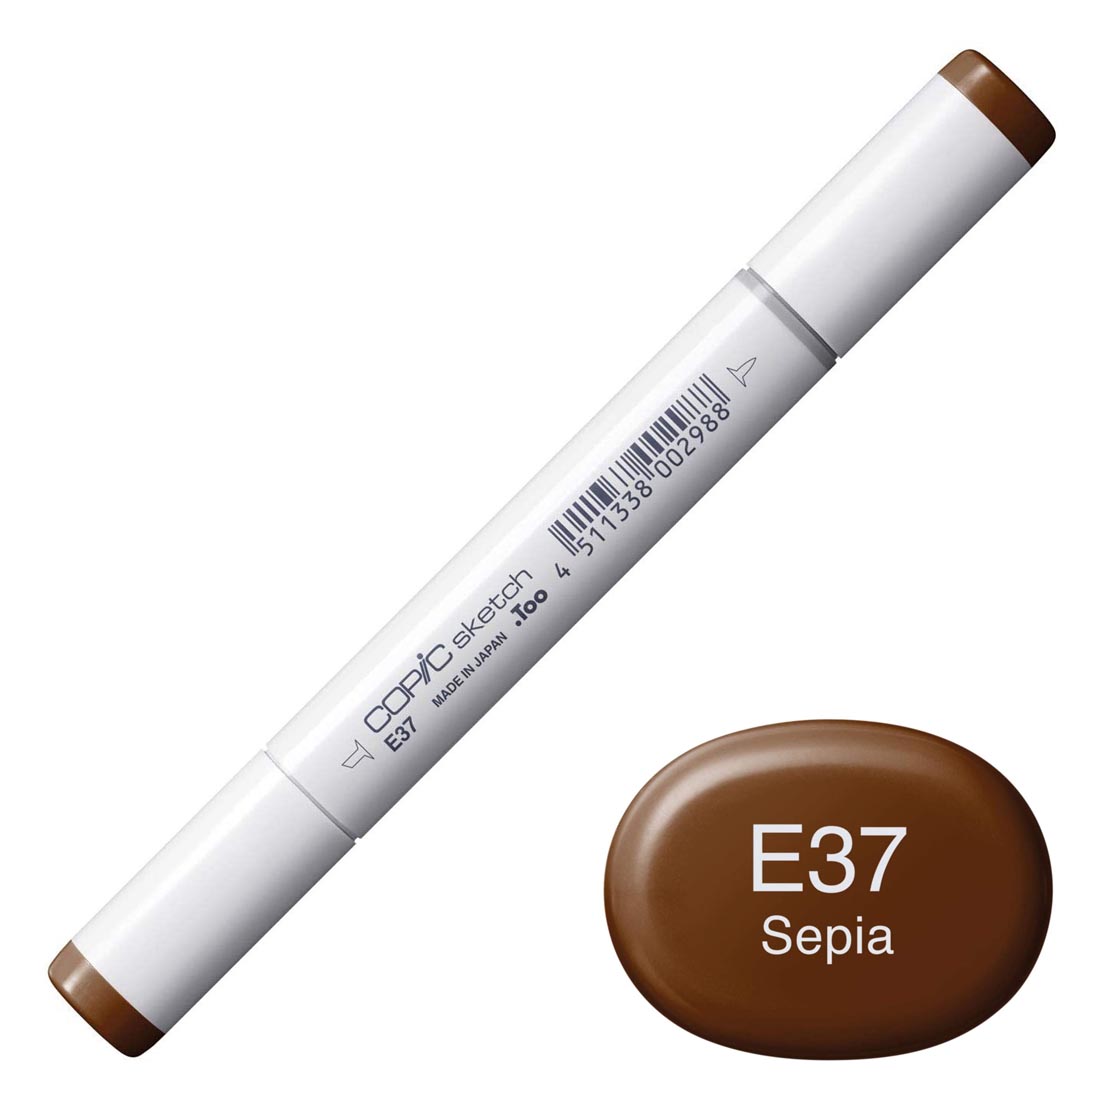 COPIC Sketch Marker with a color swatch and text of E37 Sepia